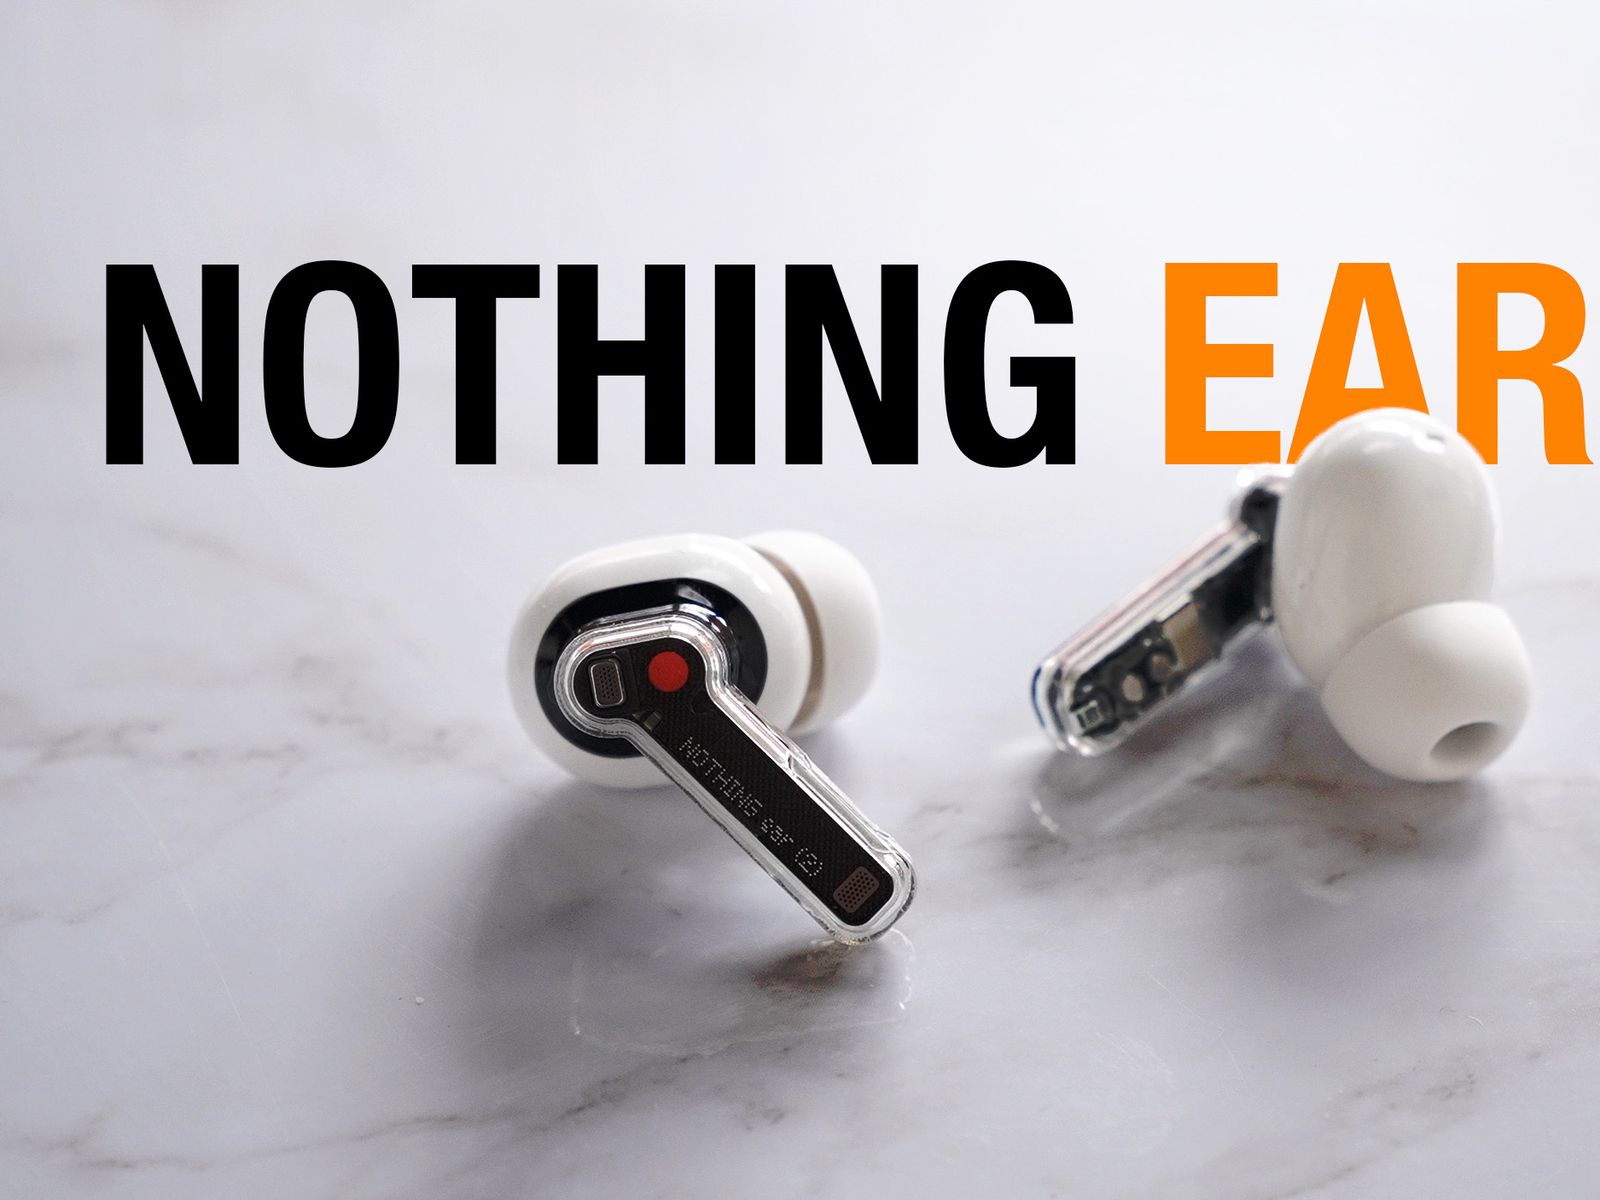 The Nothing Ear 2 is At long last Here